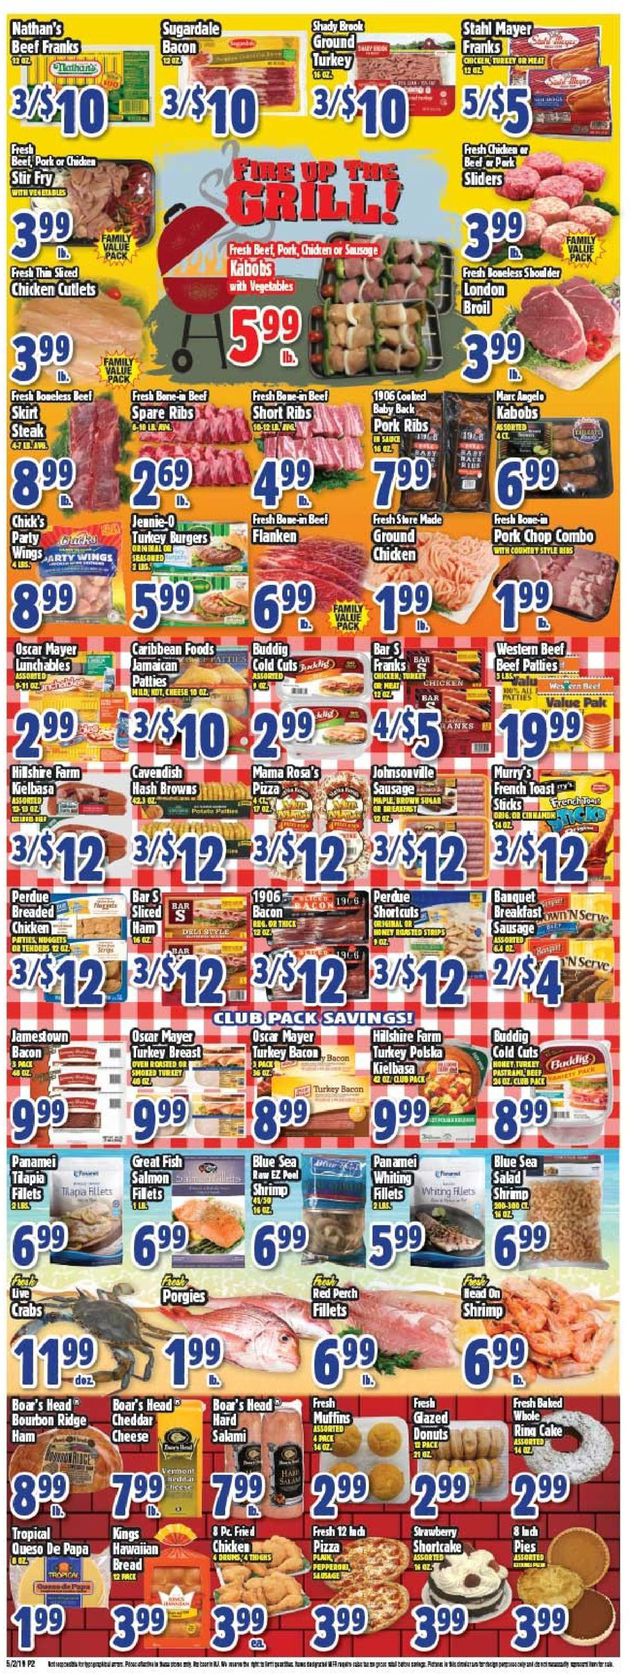 Western Beef Ad from 05/02/2019